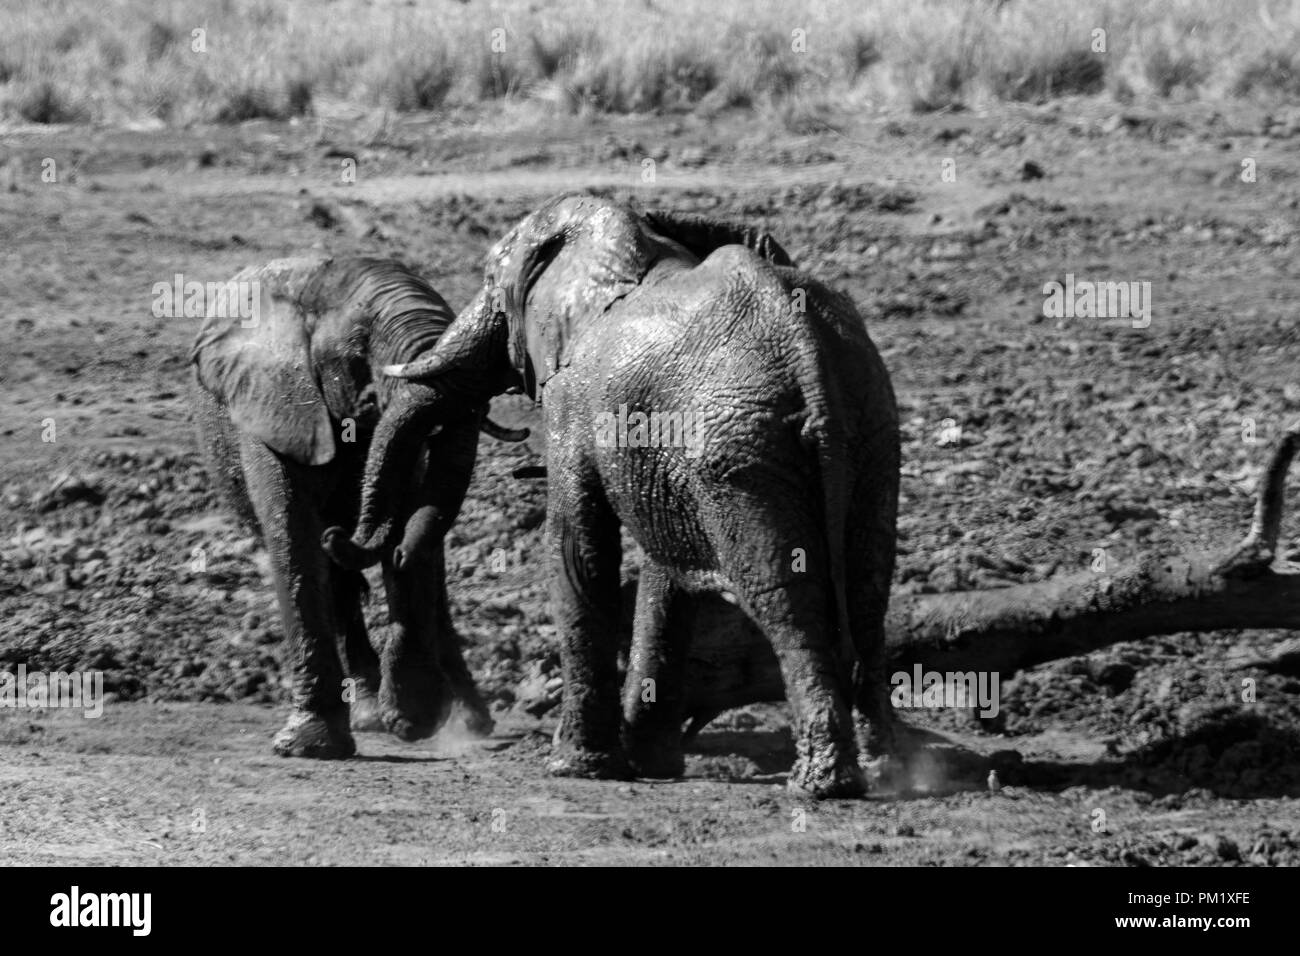 Black and White Two elephants in the wild near water and playing around a flattened tree trunk. Stock Photo